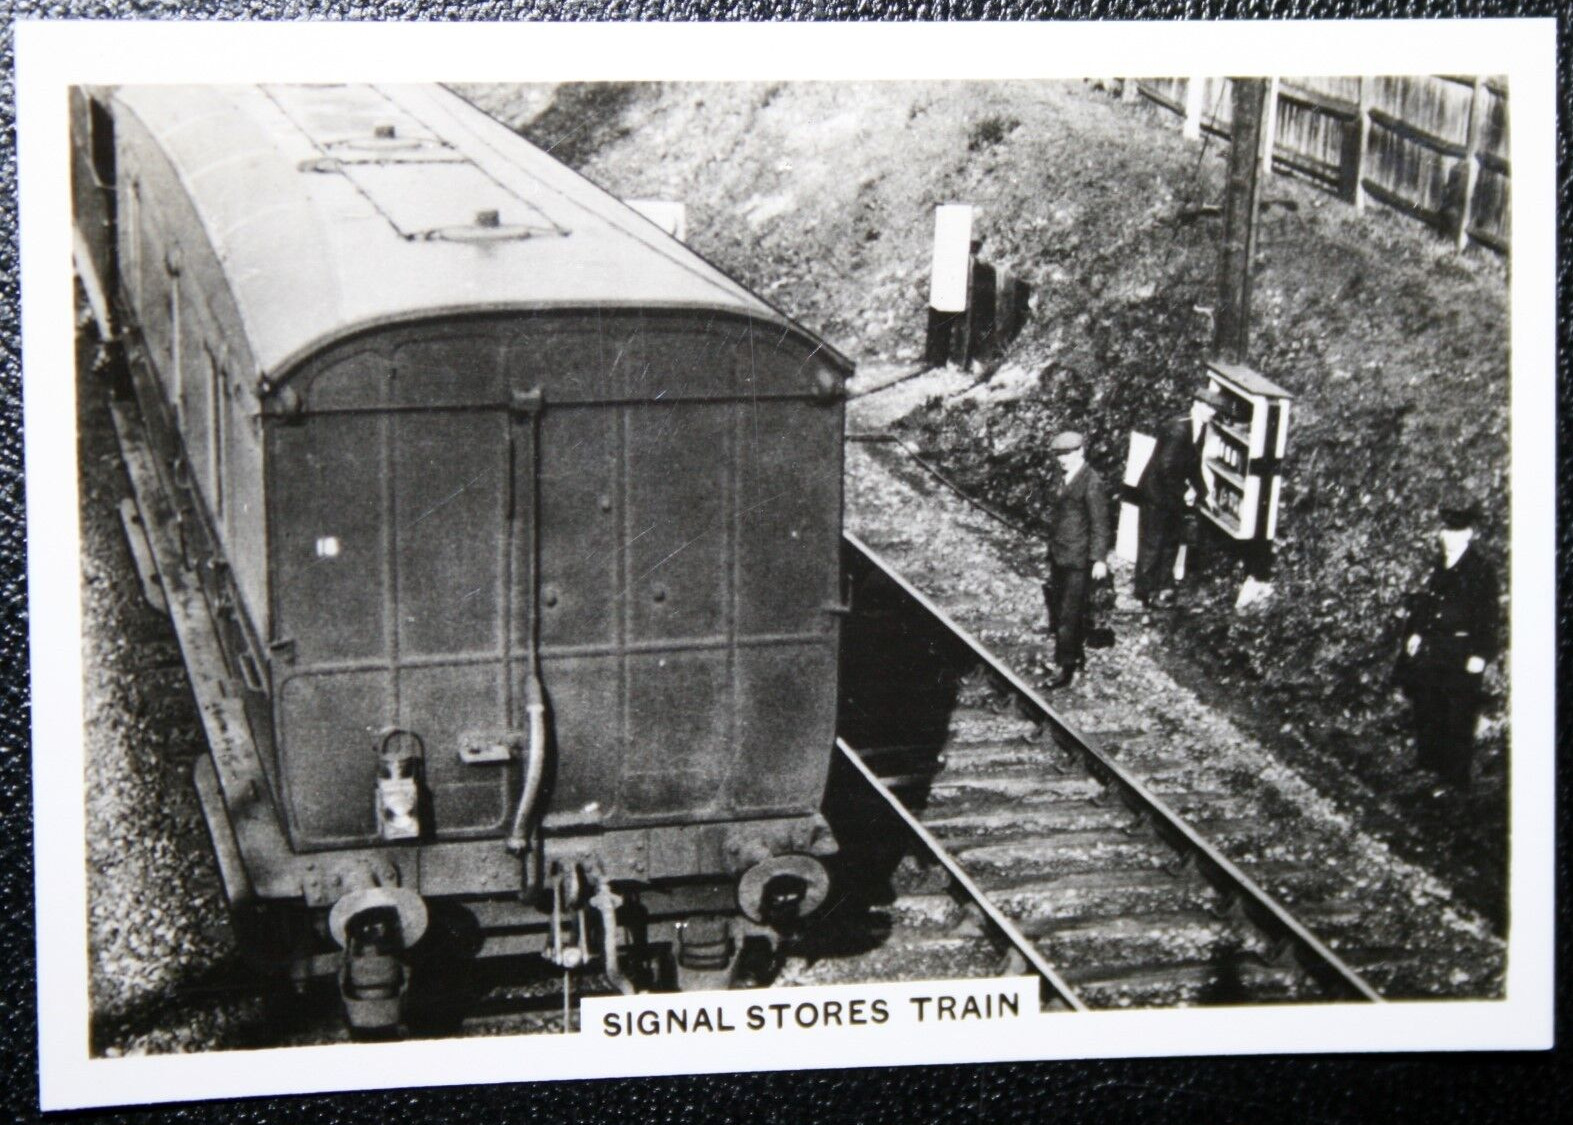 GWR    Signal Stores Train   Didcot  Reading  Vintage  1938 Photo Card  CD21MS